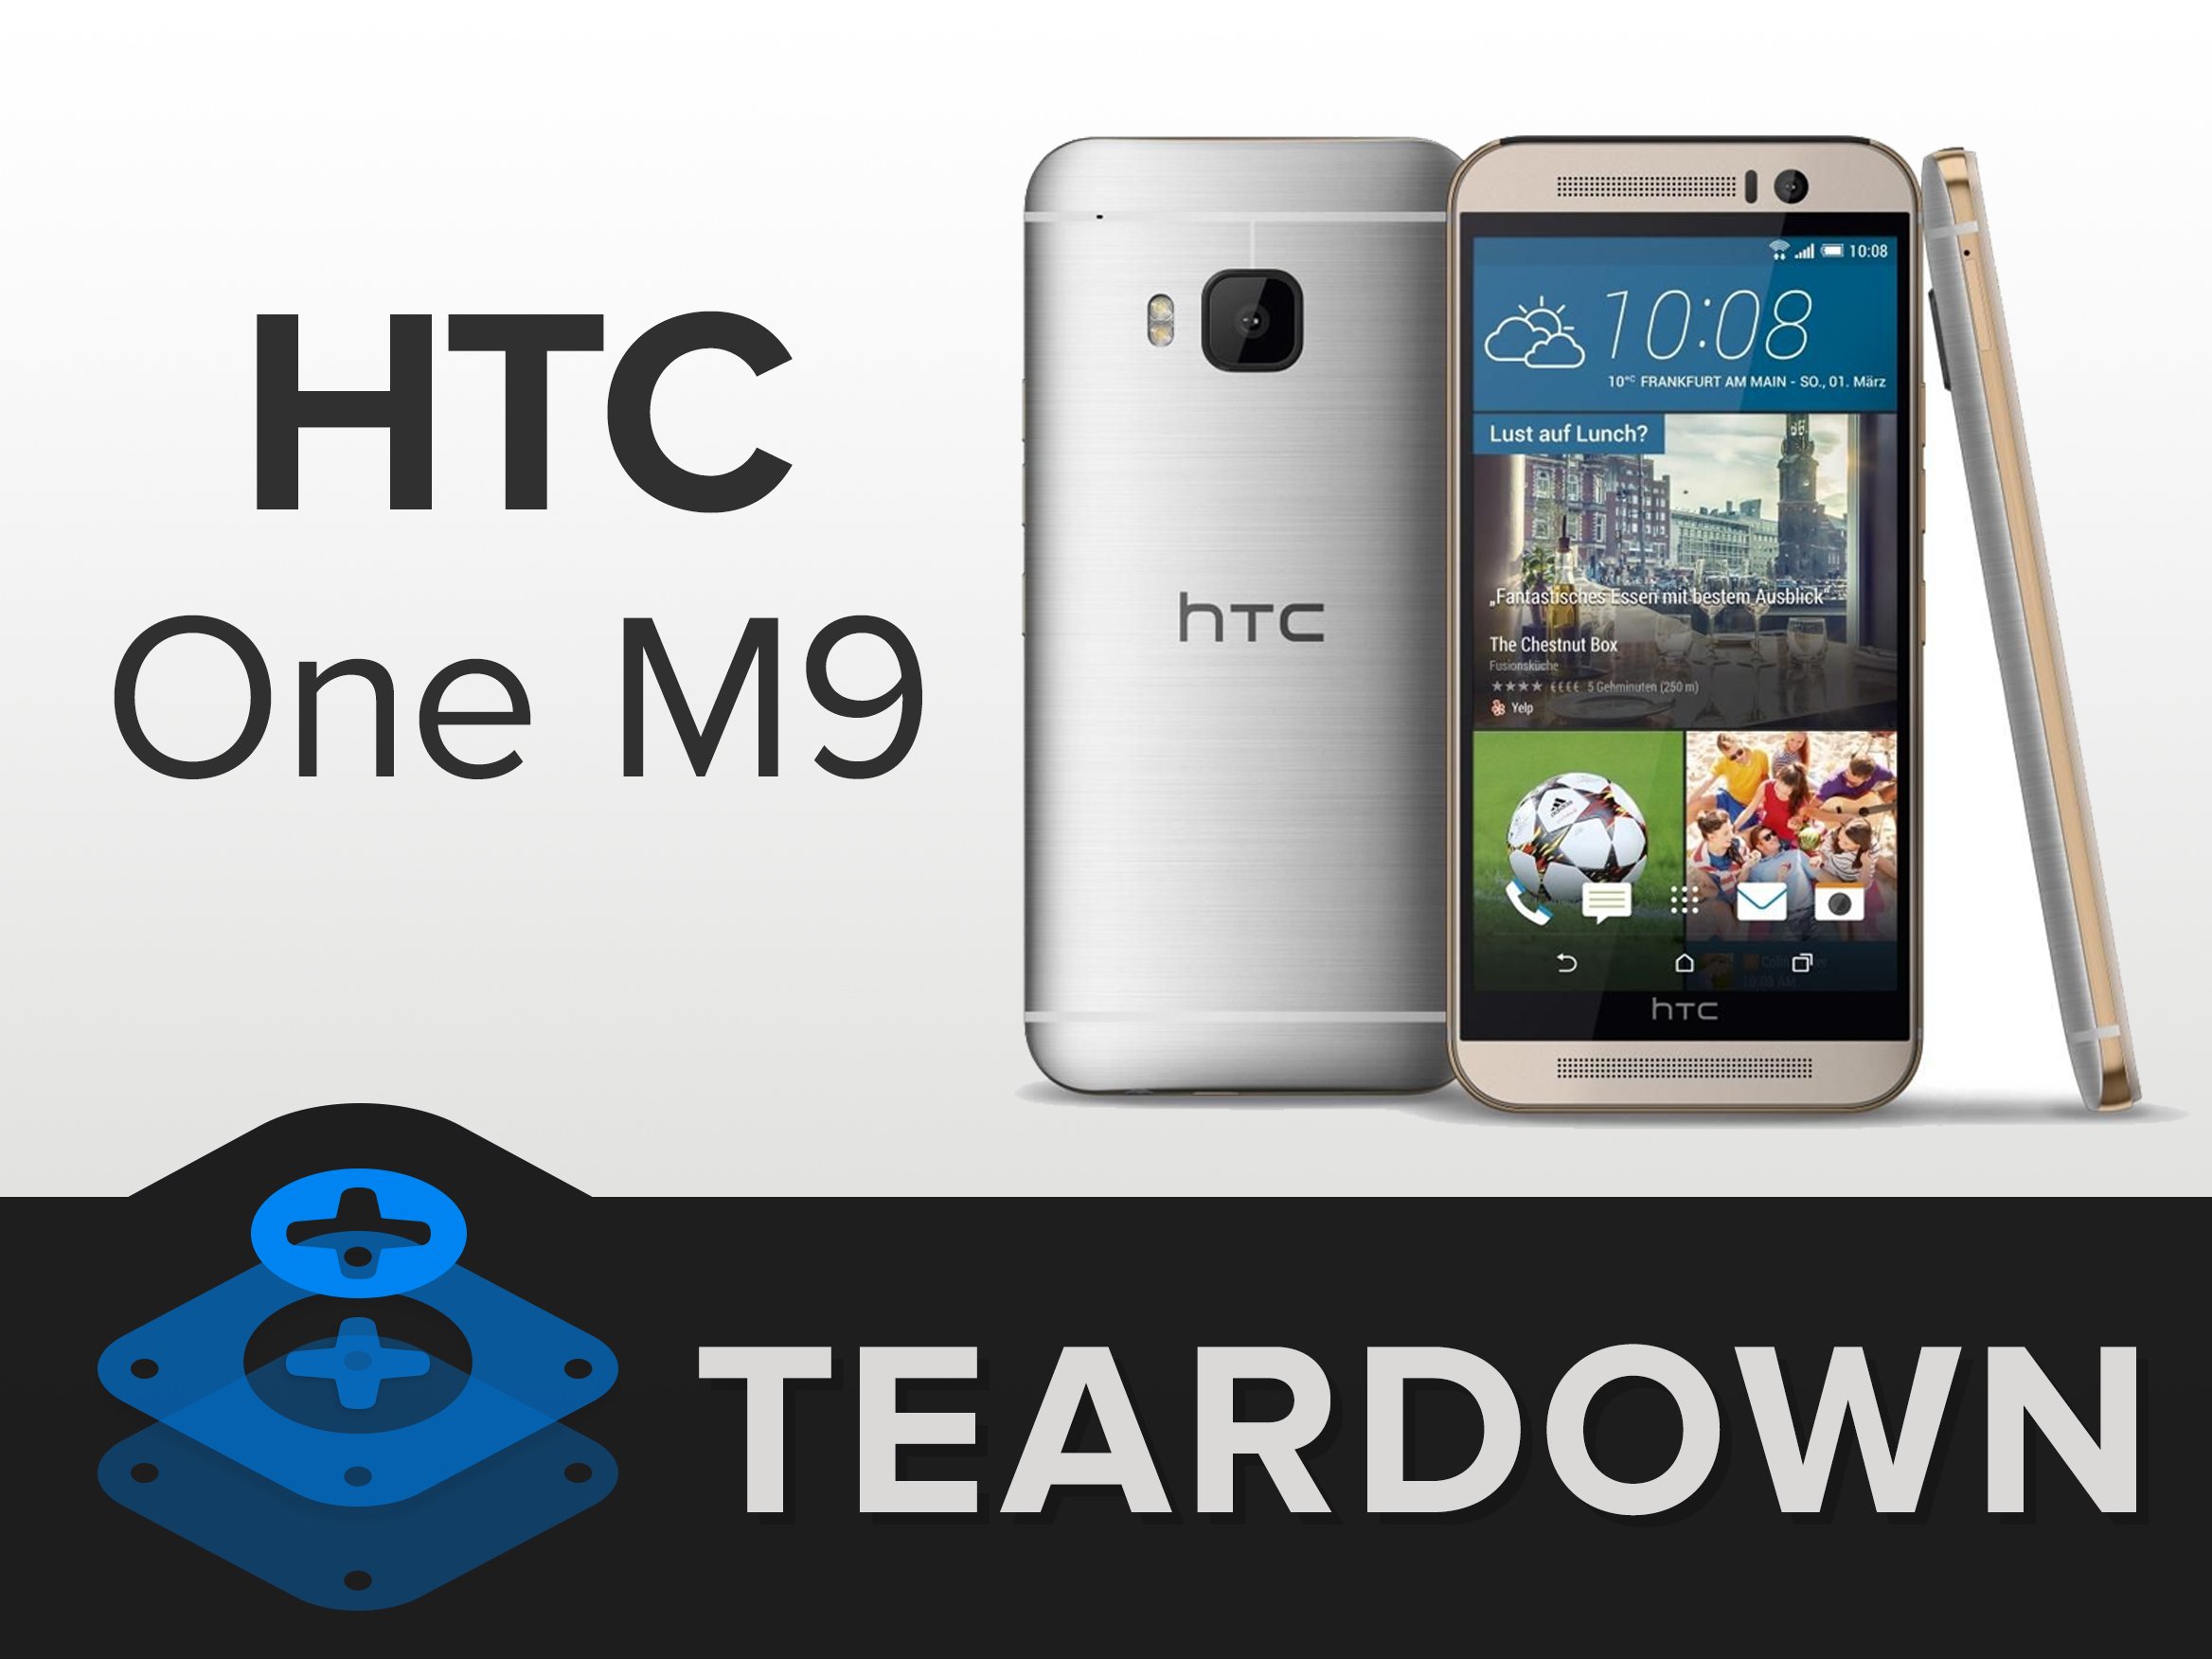 Device software update utility htc m9 battery life